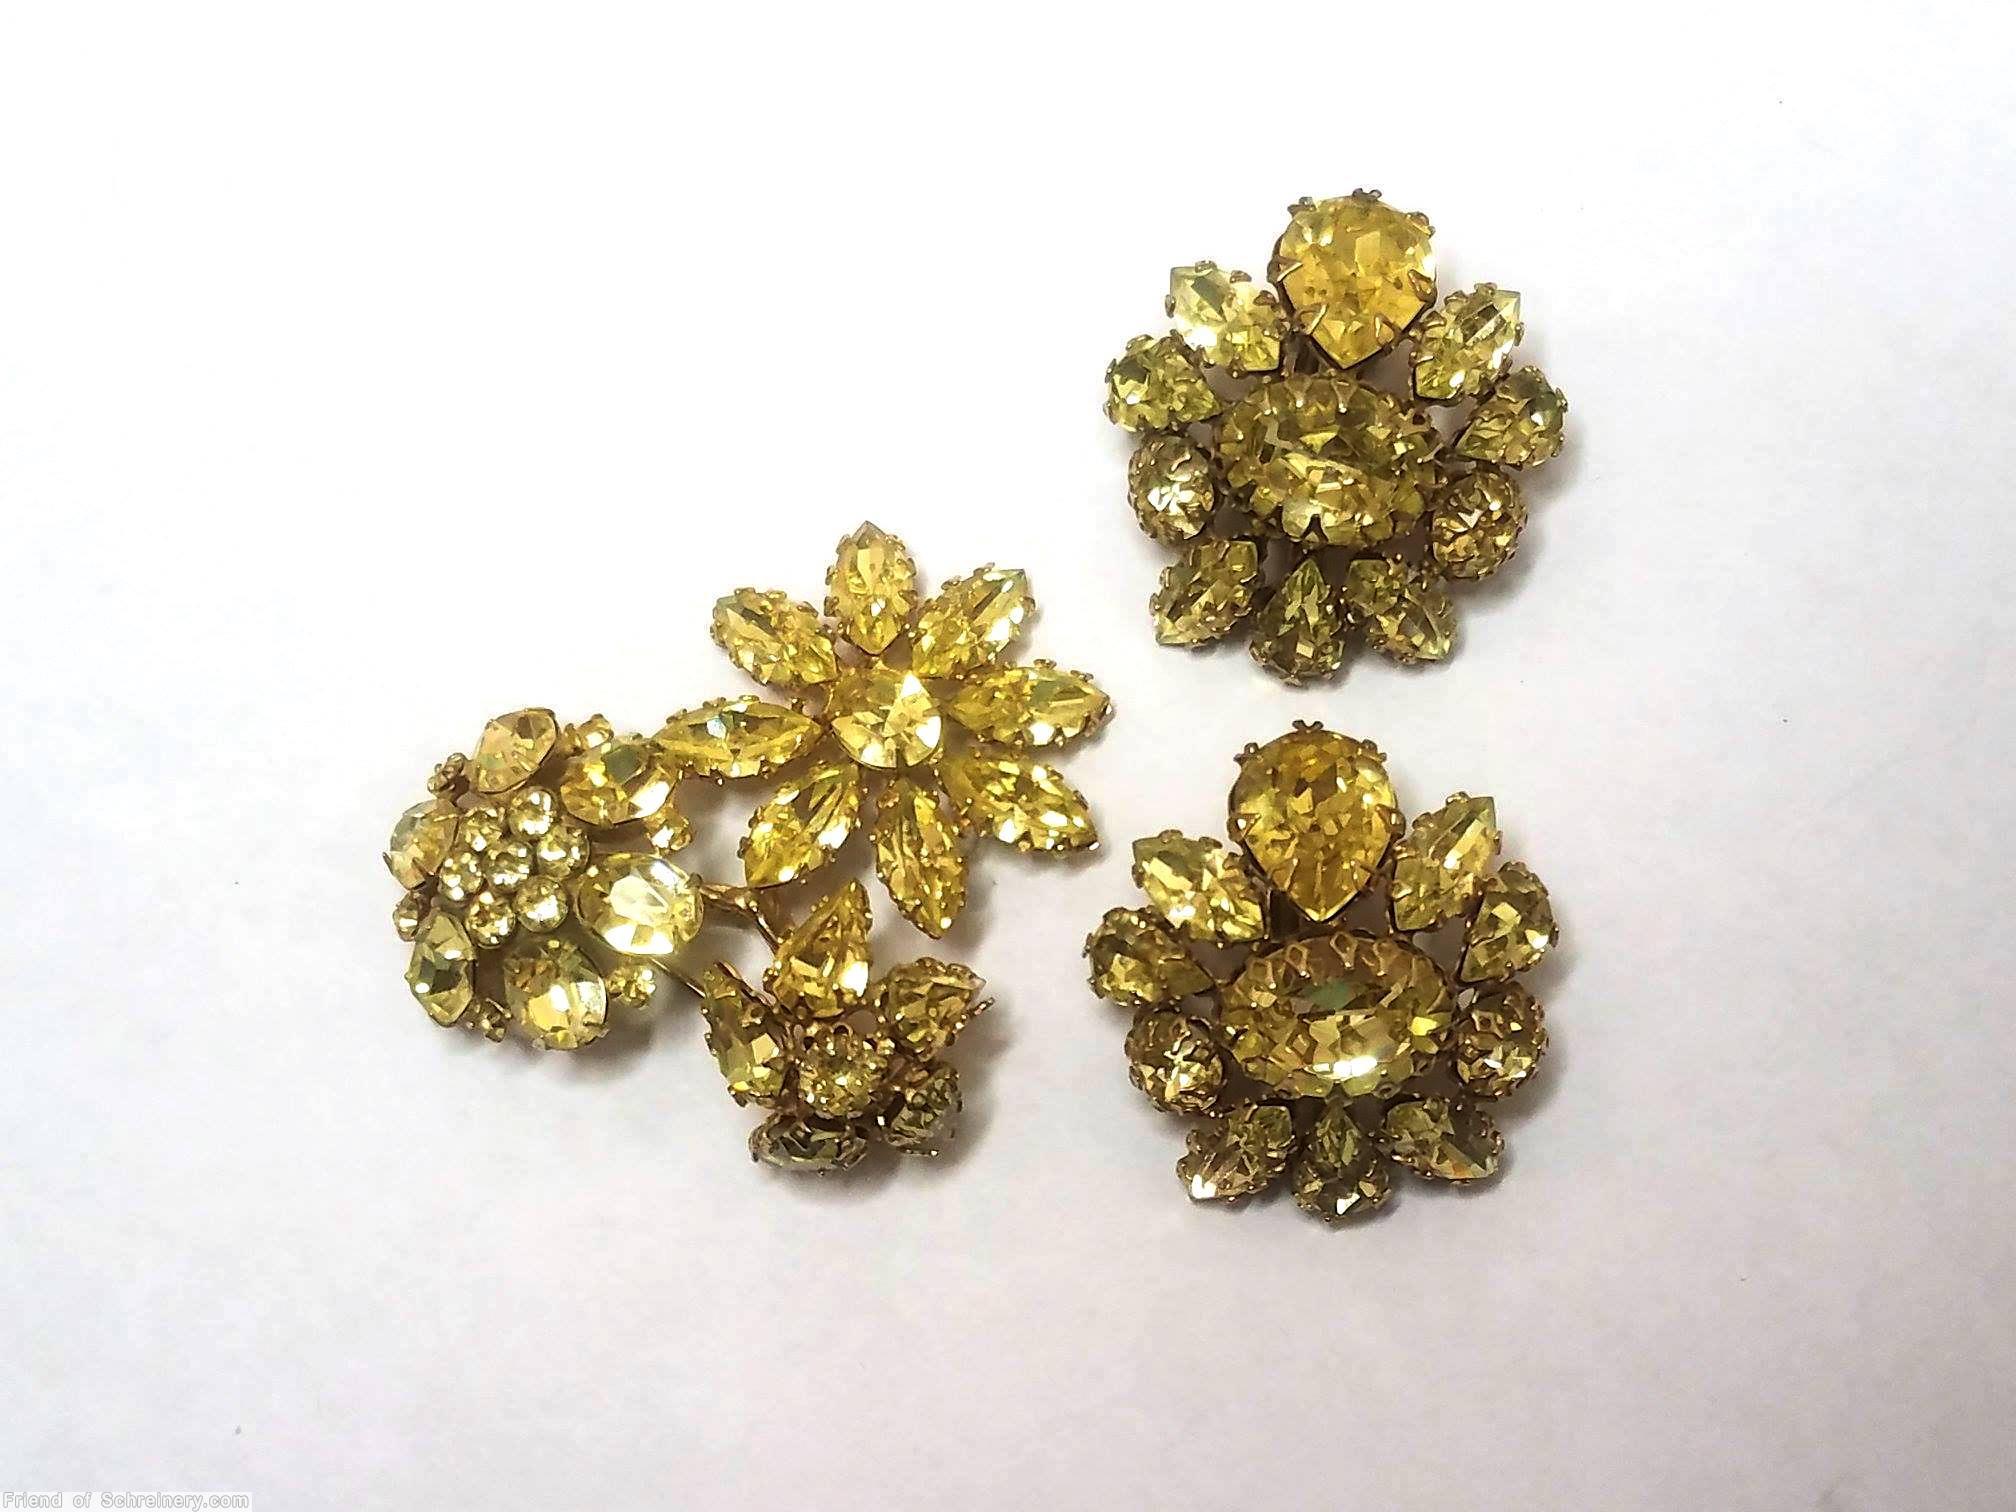 Schreiner 3 varied flower pin clear champagne goldtone jewelry